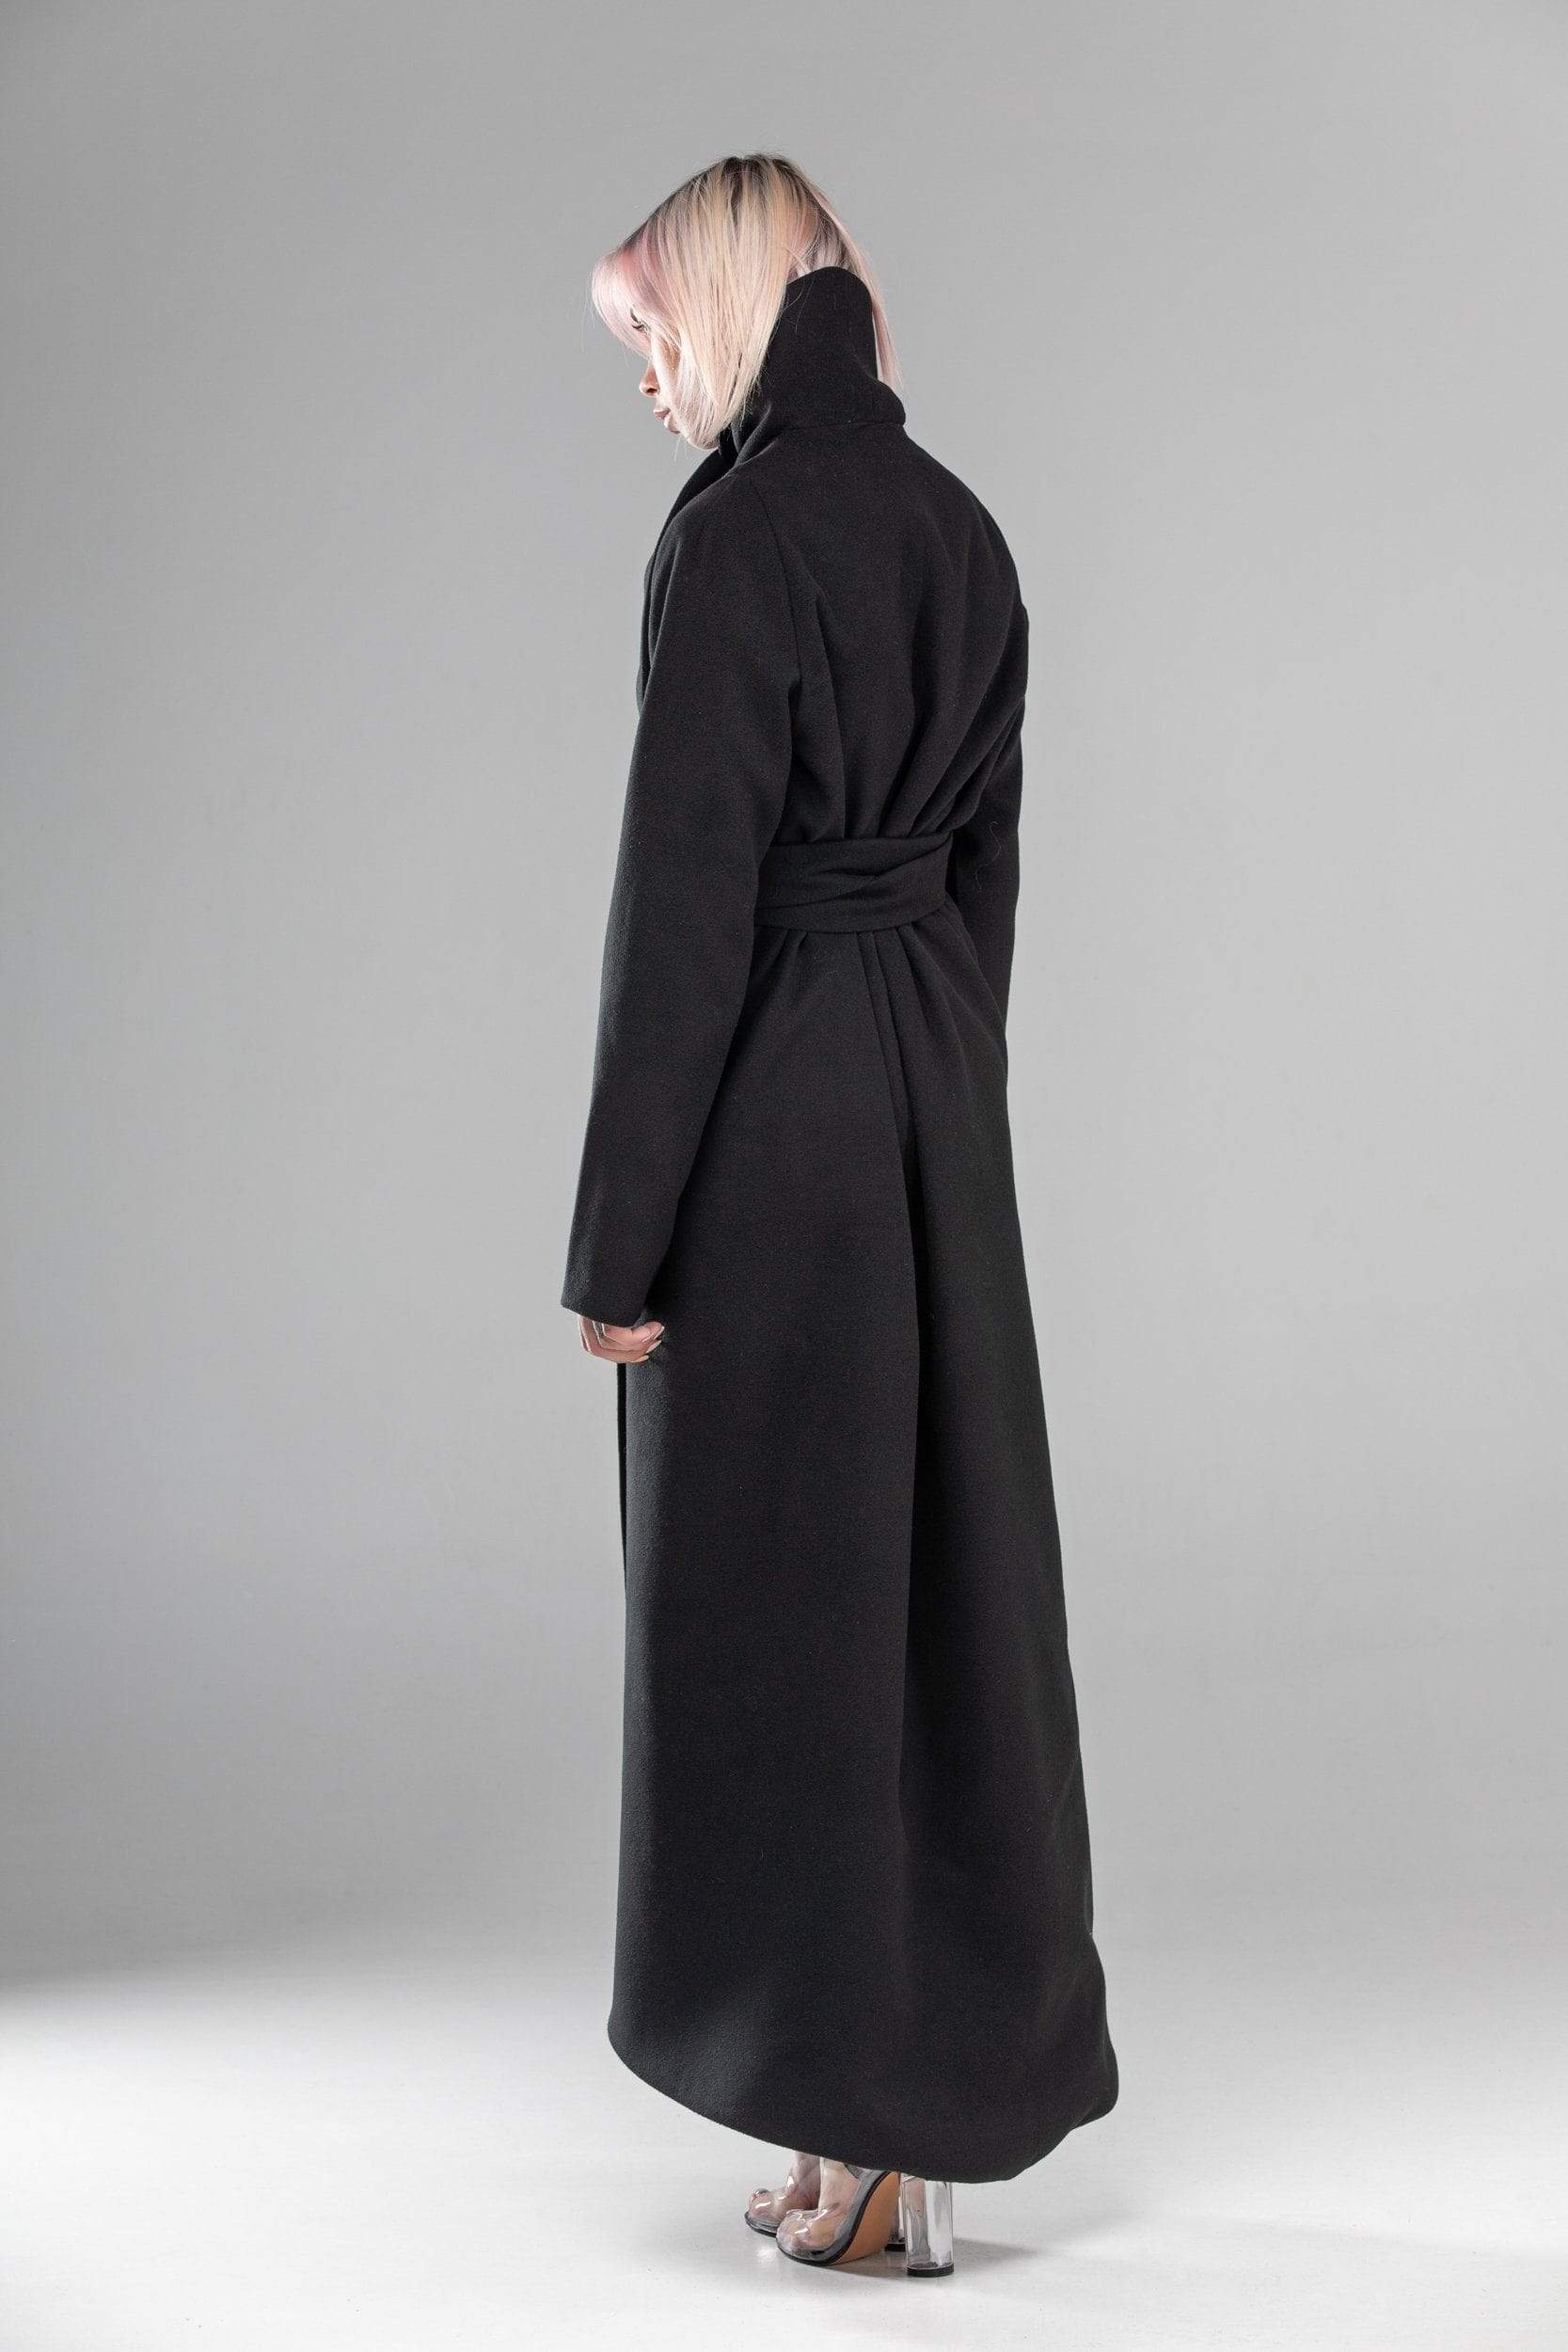 MDNT45 Coats & Jackets for Woman Winter Belted Maxi Coat